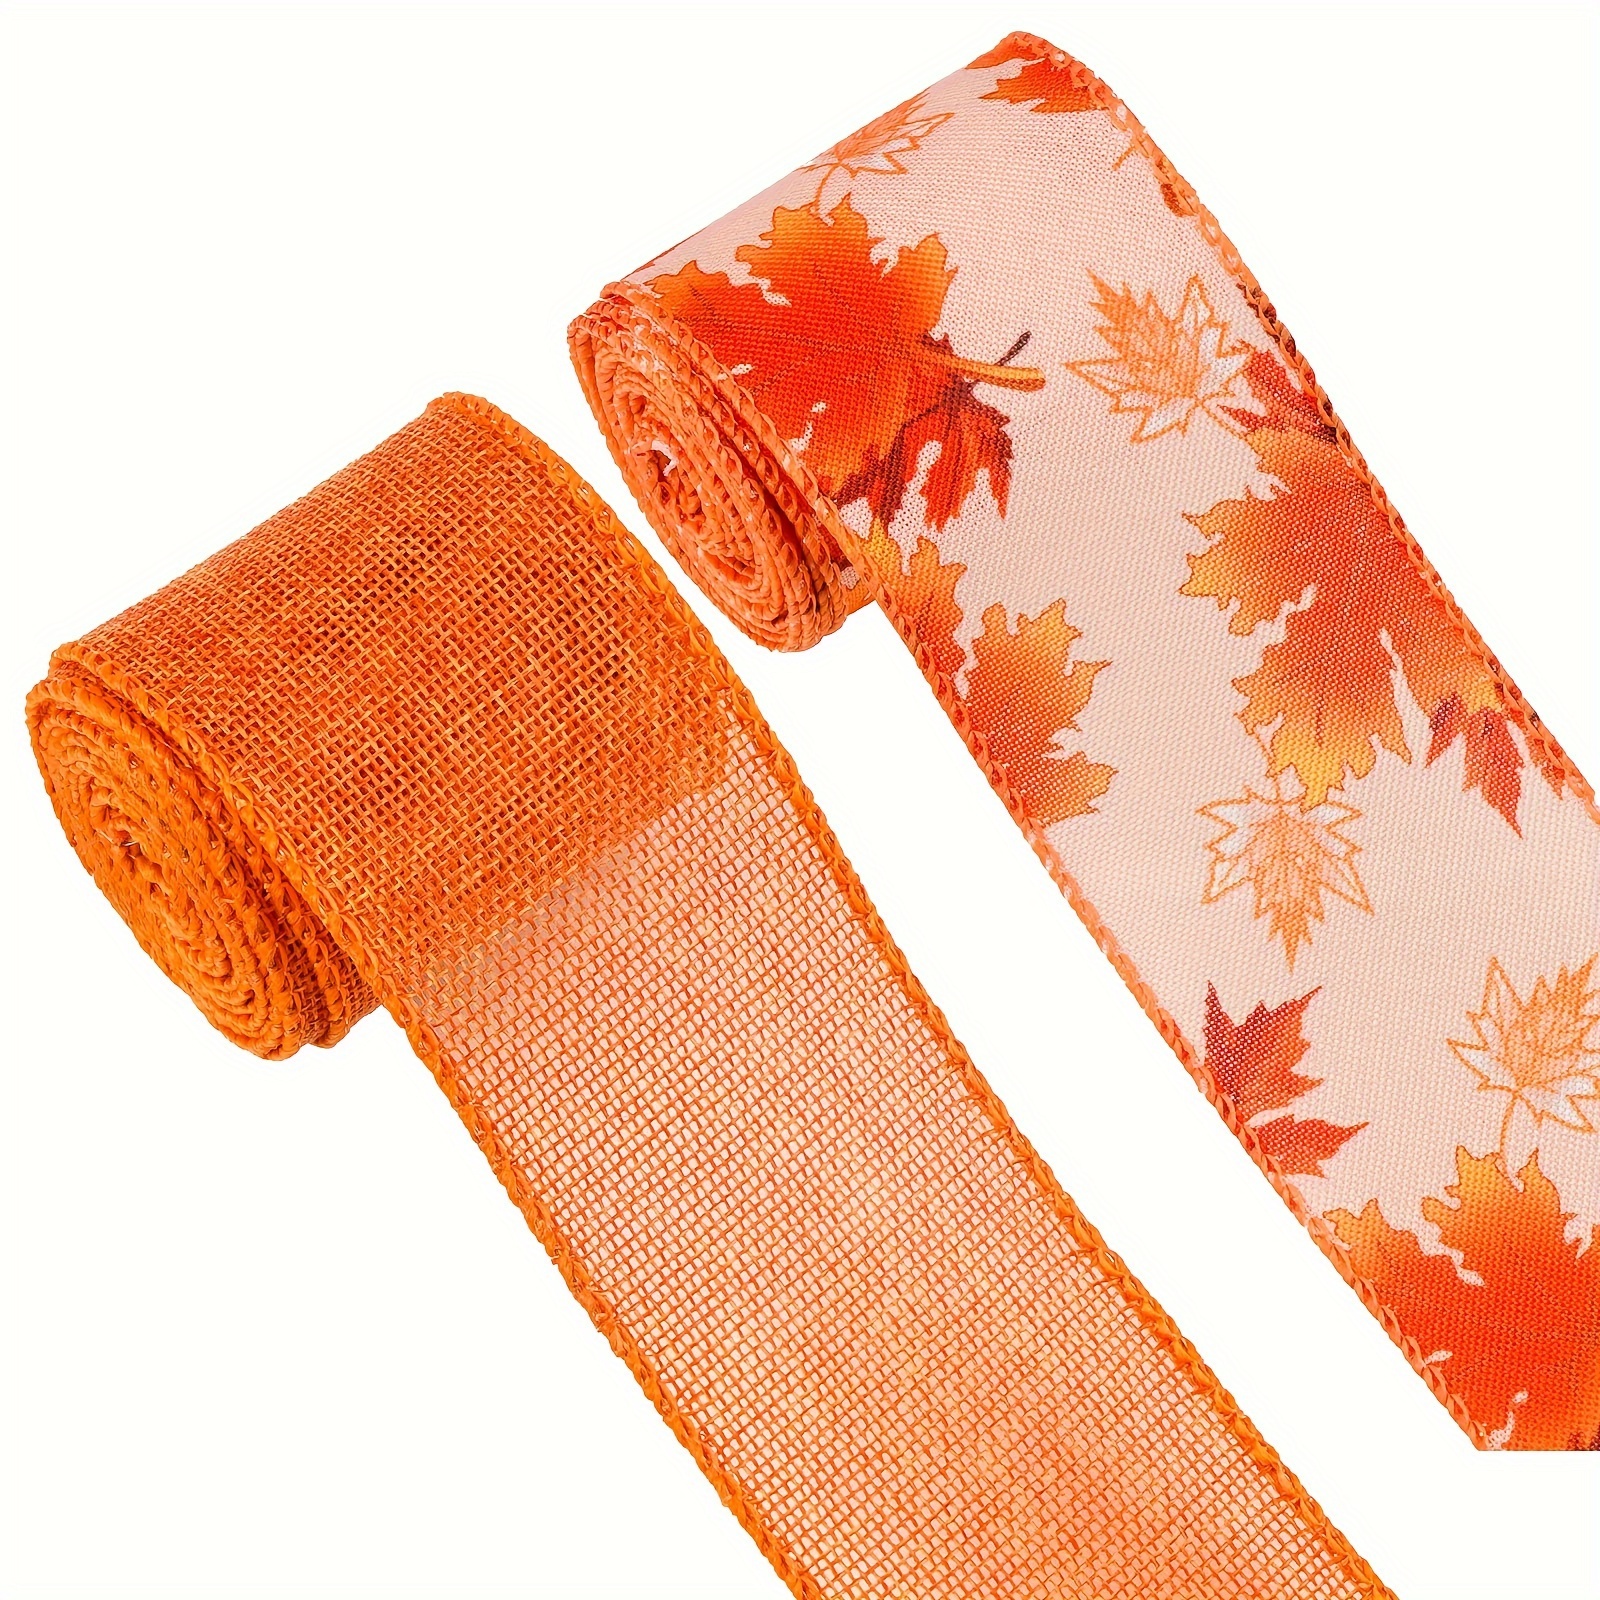 

10 Yards Orange Wired Edge Ribbon, 2.5" Wide - Perfect For Fall Decorations, Halloween, Thanksgiving & Harvest Festivals | Durable Craft Ribbon For Gift Wrapping, Floral Arrangements, Bows & Garlands